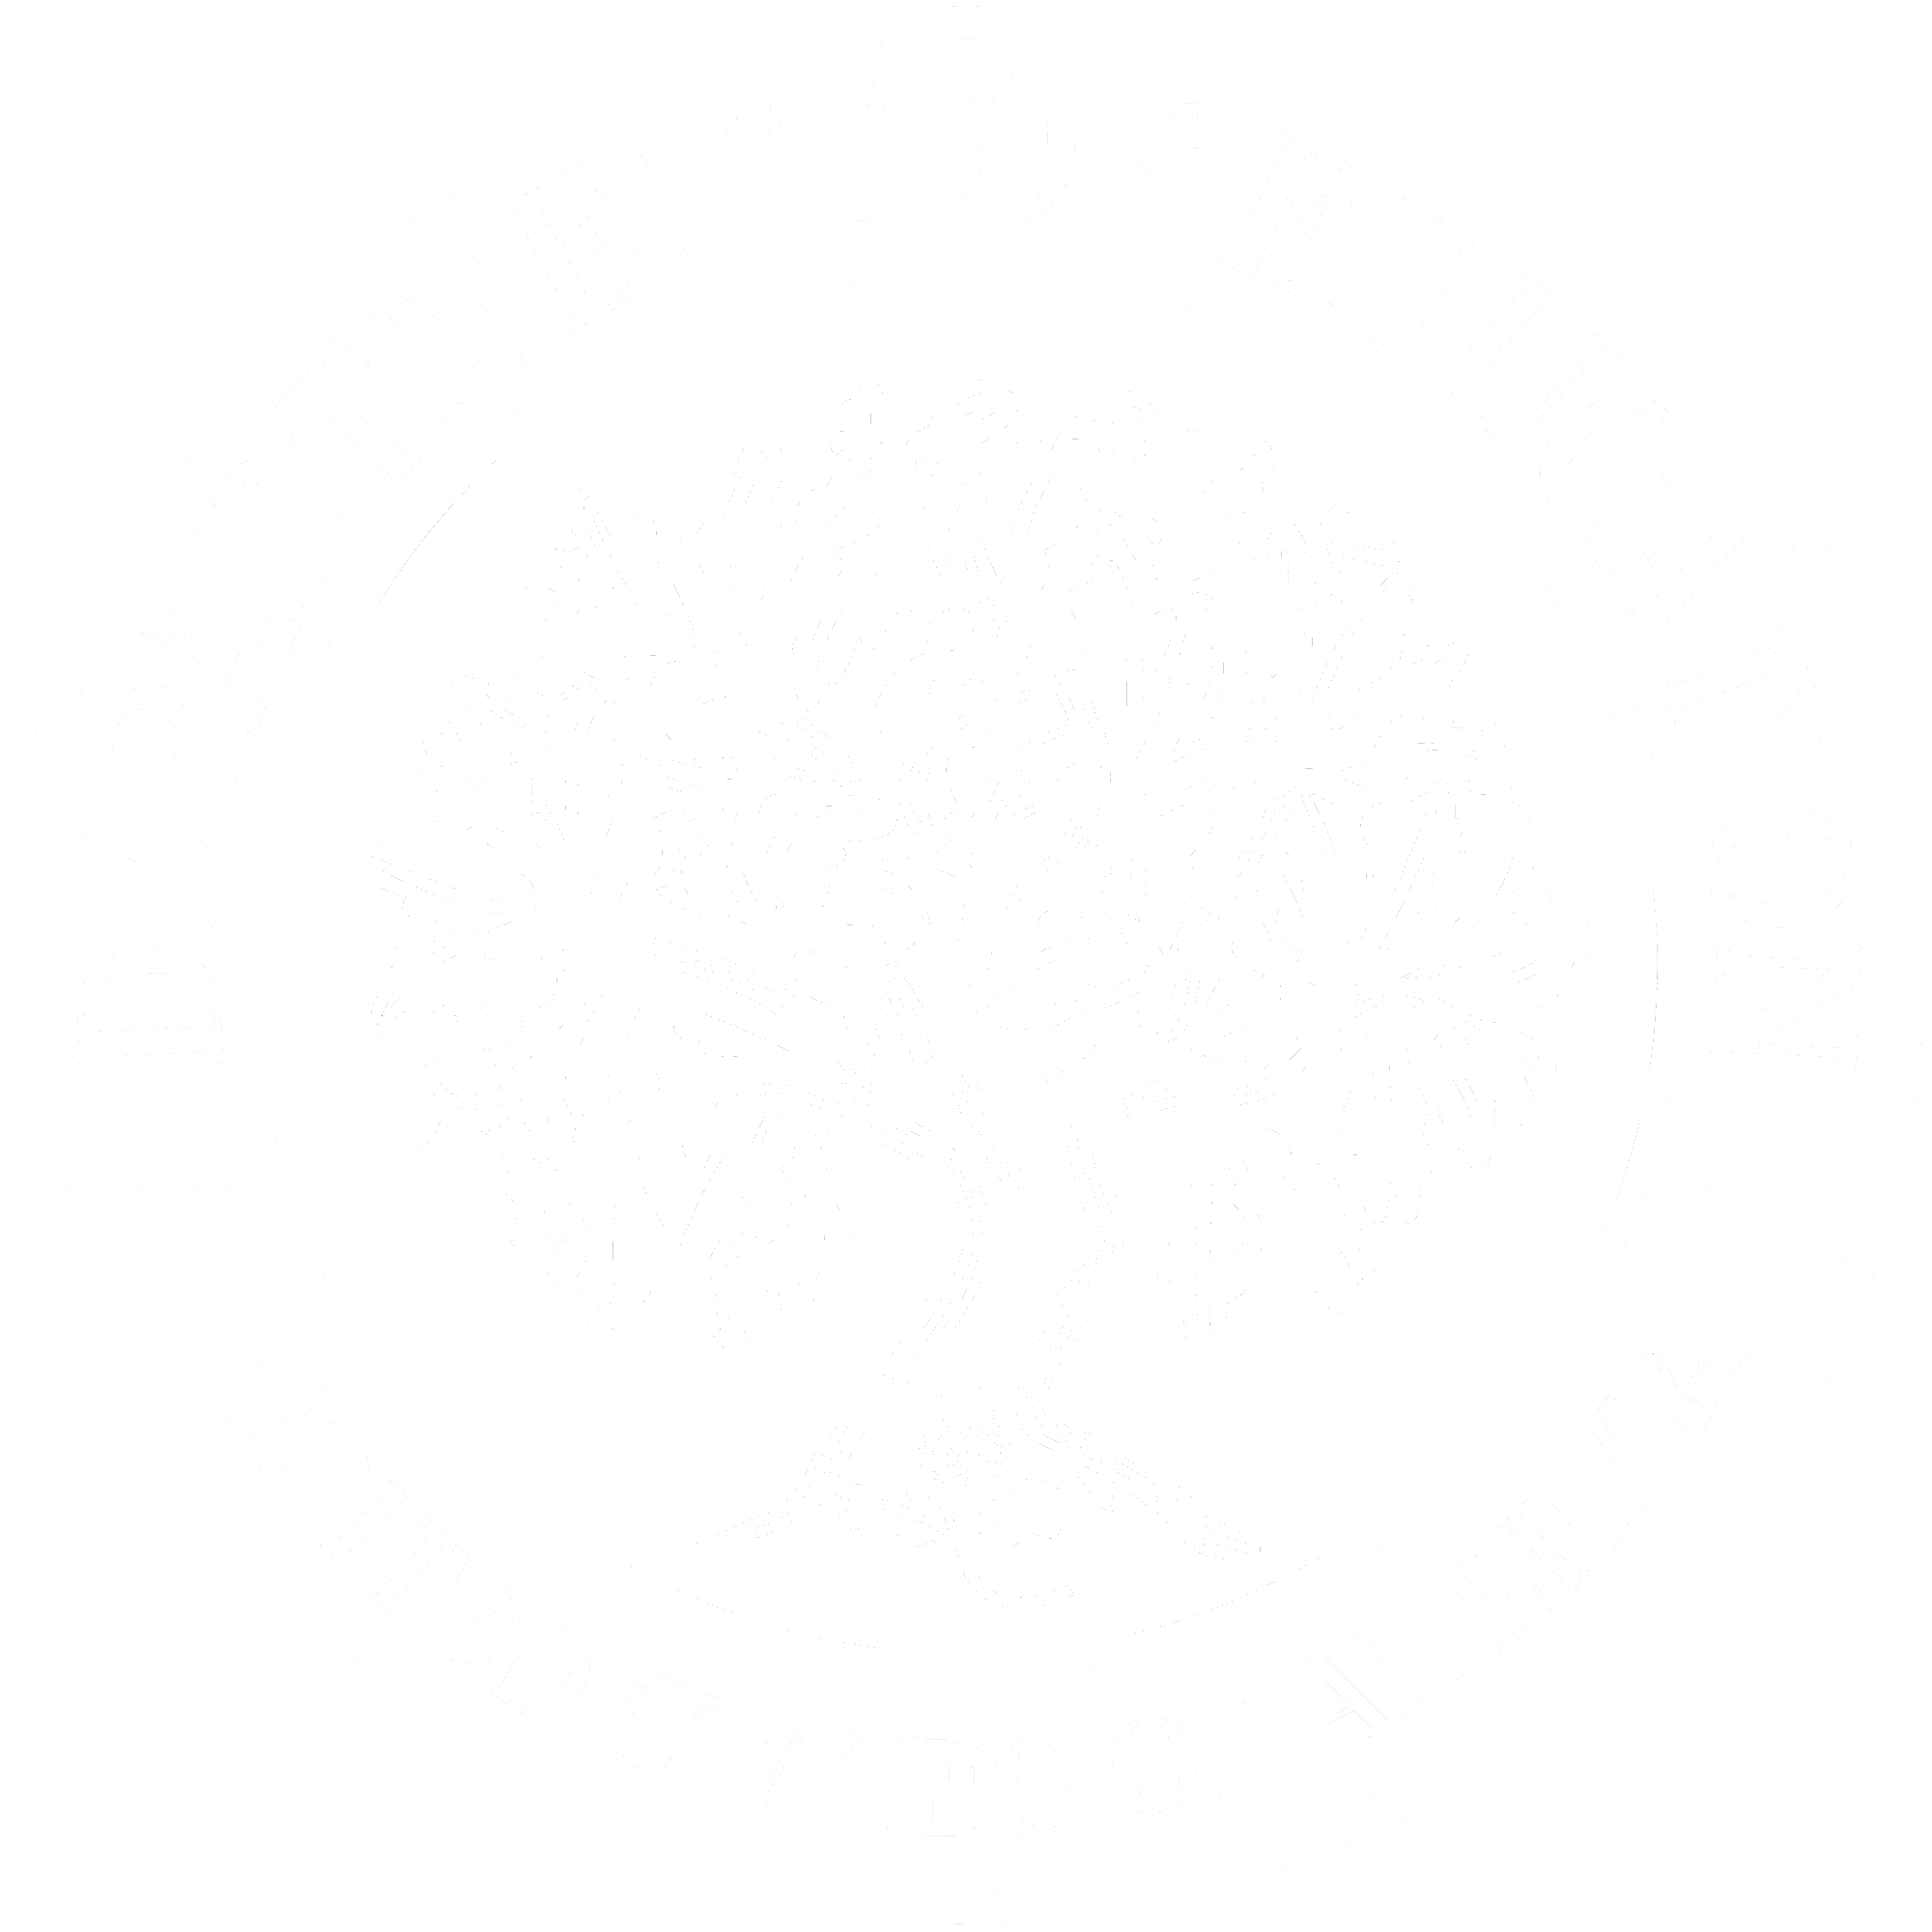 Dept. of Education logo in white colors on a black background.